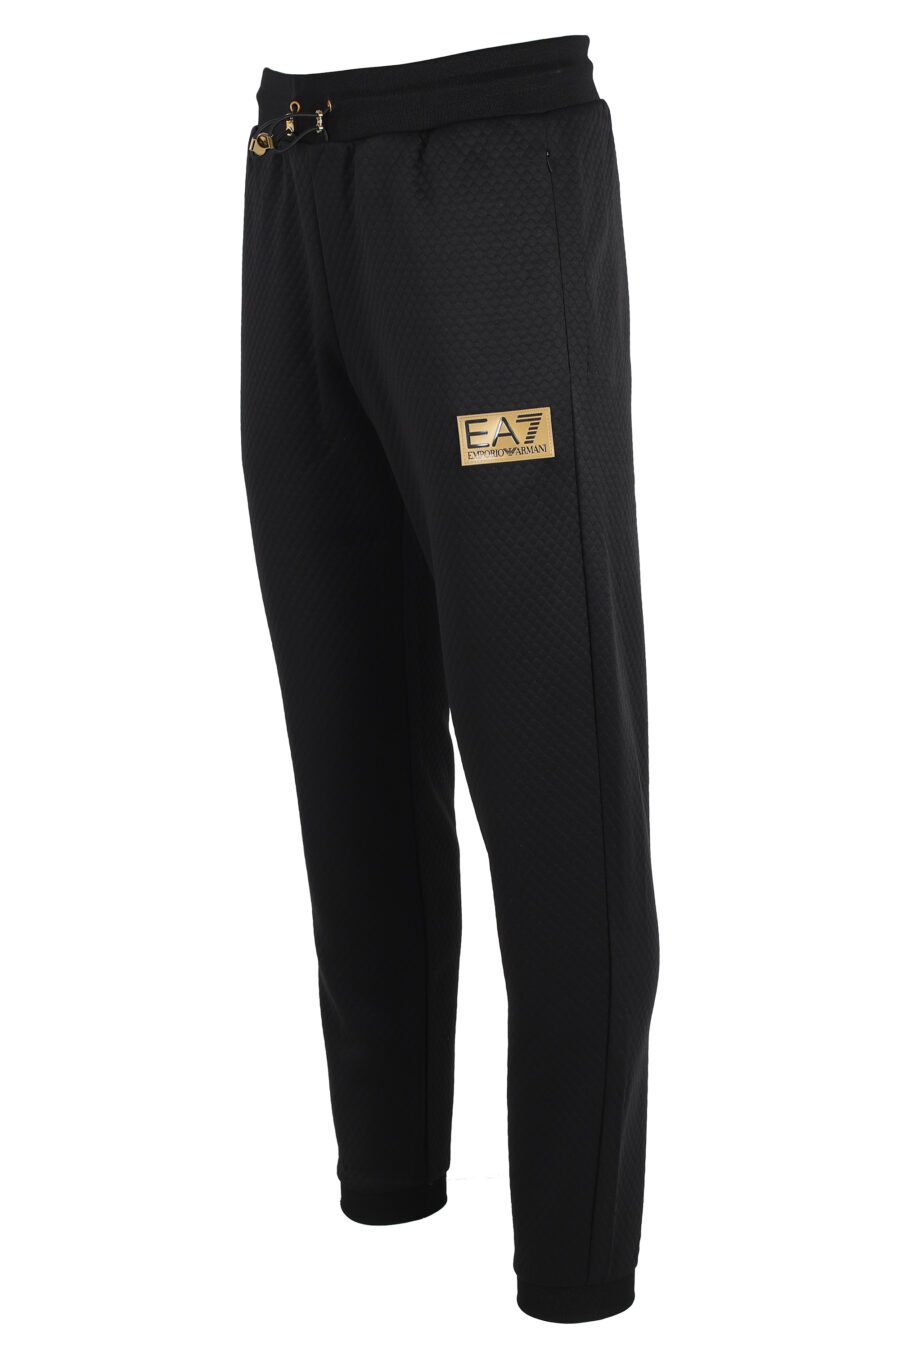 Tracksuit bottoms black with gold plaque logo "lux identity" - IMG 4816